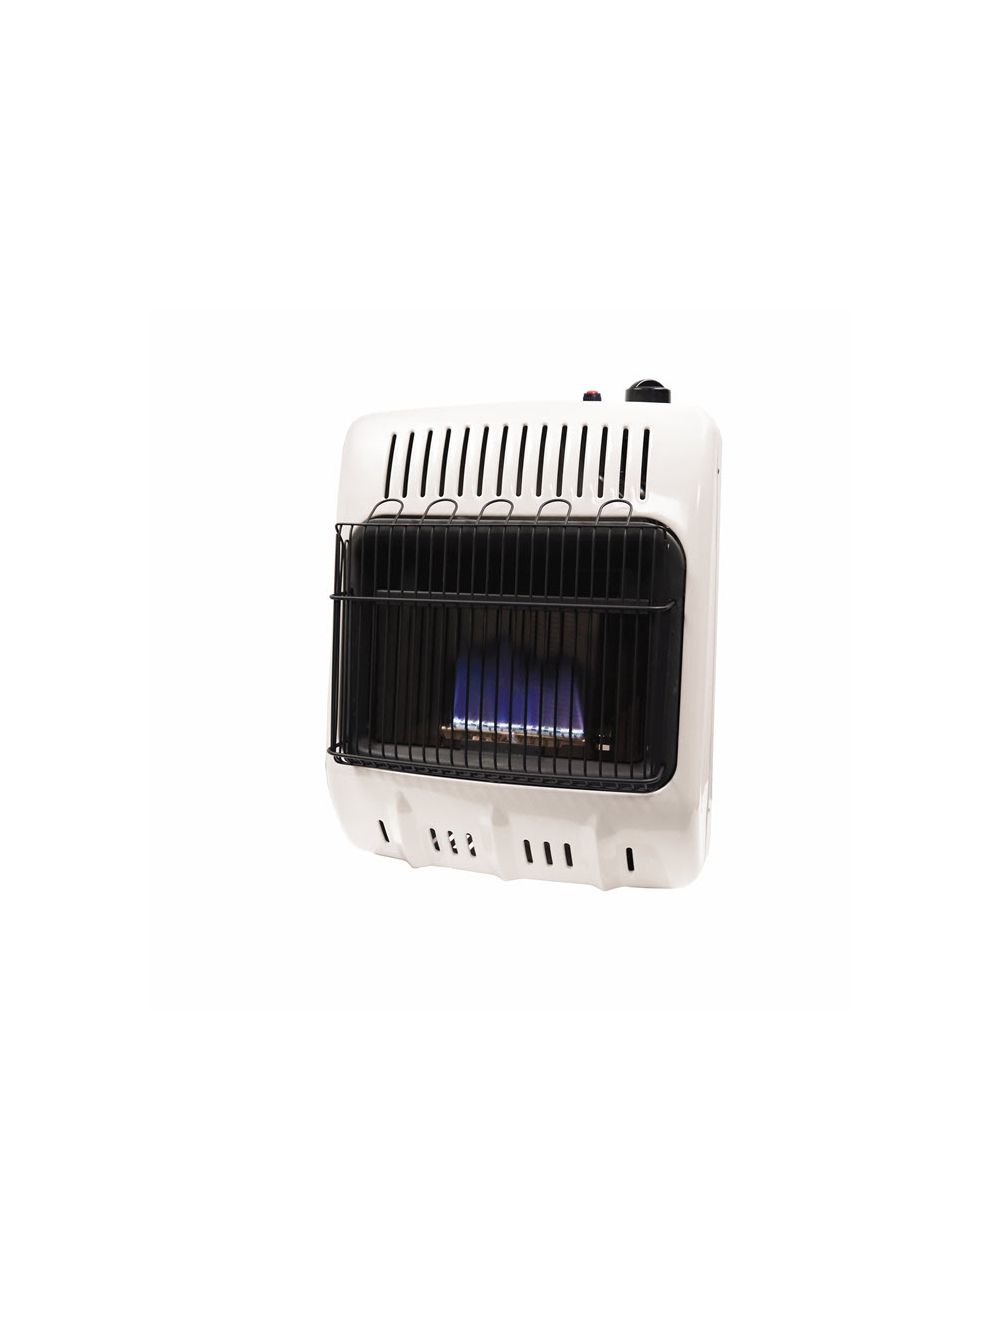 blue flame heater